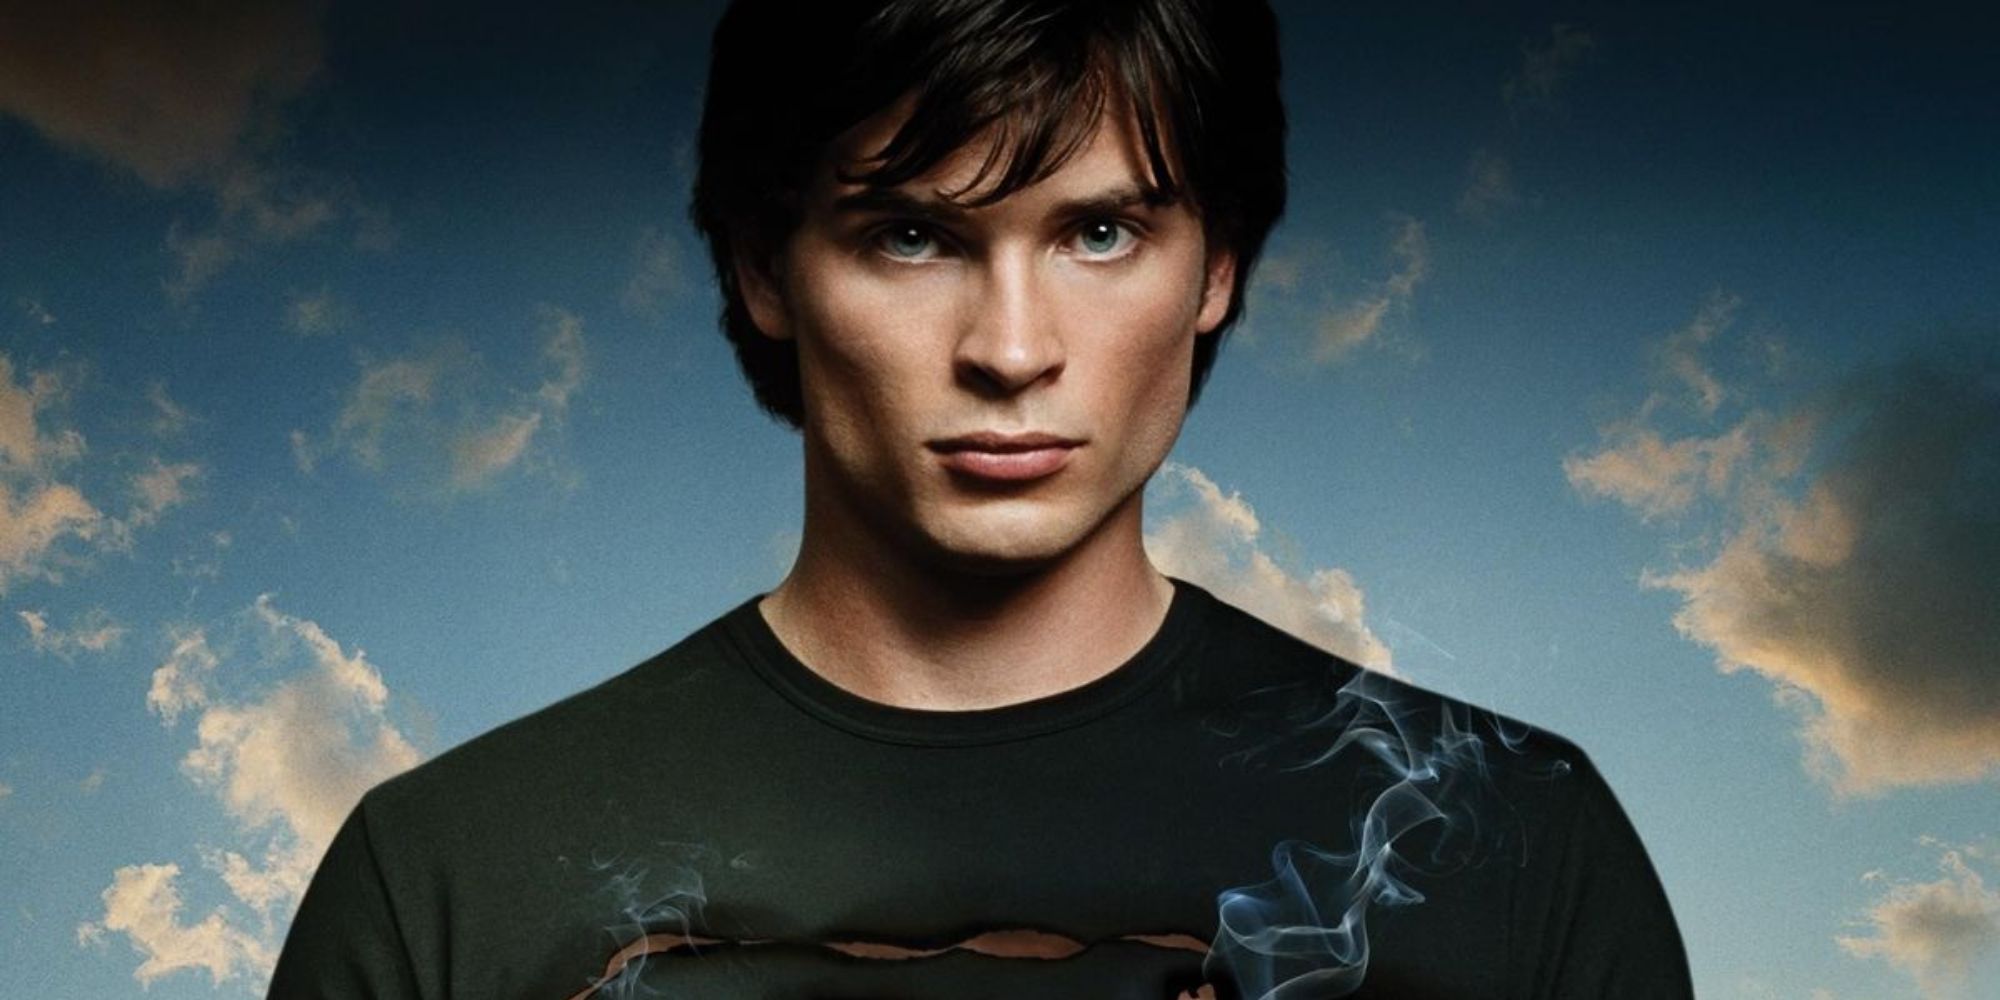 Tom Welling as Superman (Smallville)